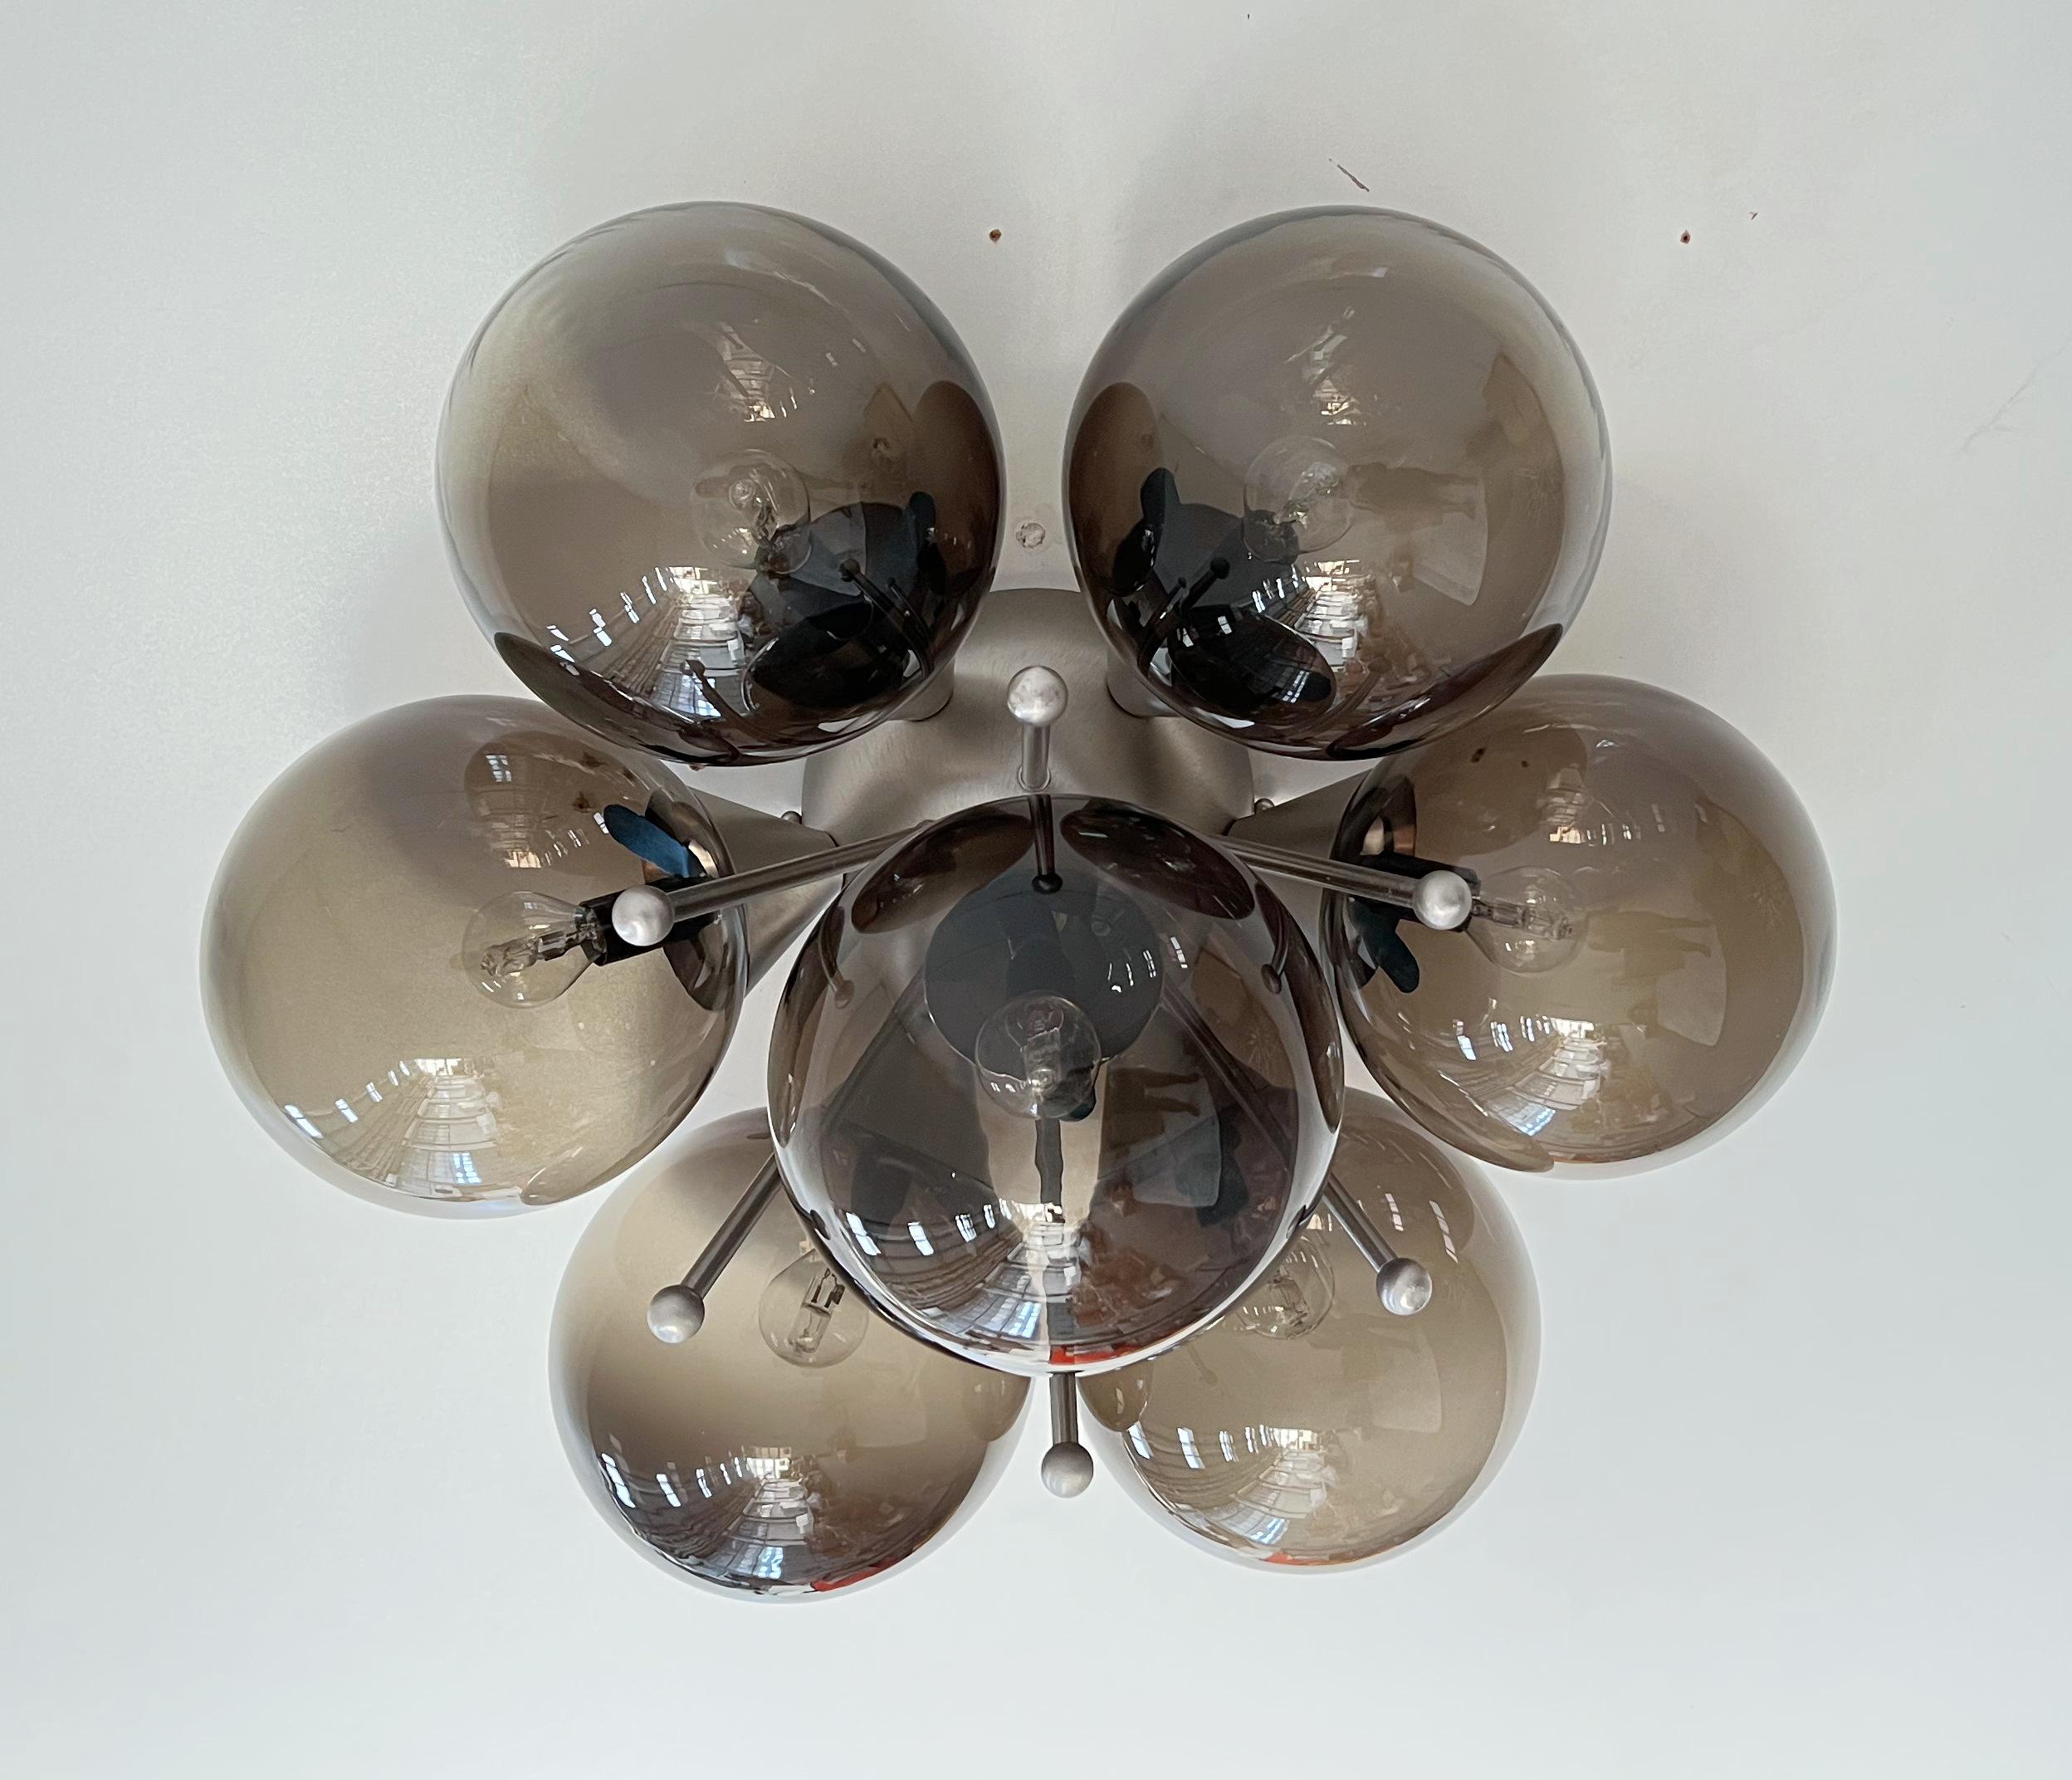 Italian flush mount with large Murano glass globes mounted on solid brass frame in satin nickel finish
Designed by Fabio Bergomi / Made in Italy 7 lights / E12 or E14 type / max 40W each 
Diameter: 25.5 inches / Height: 14 inches 
Order only / This